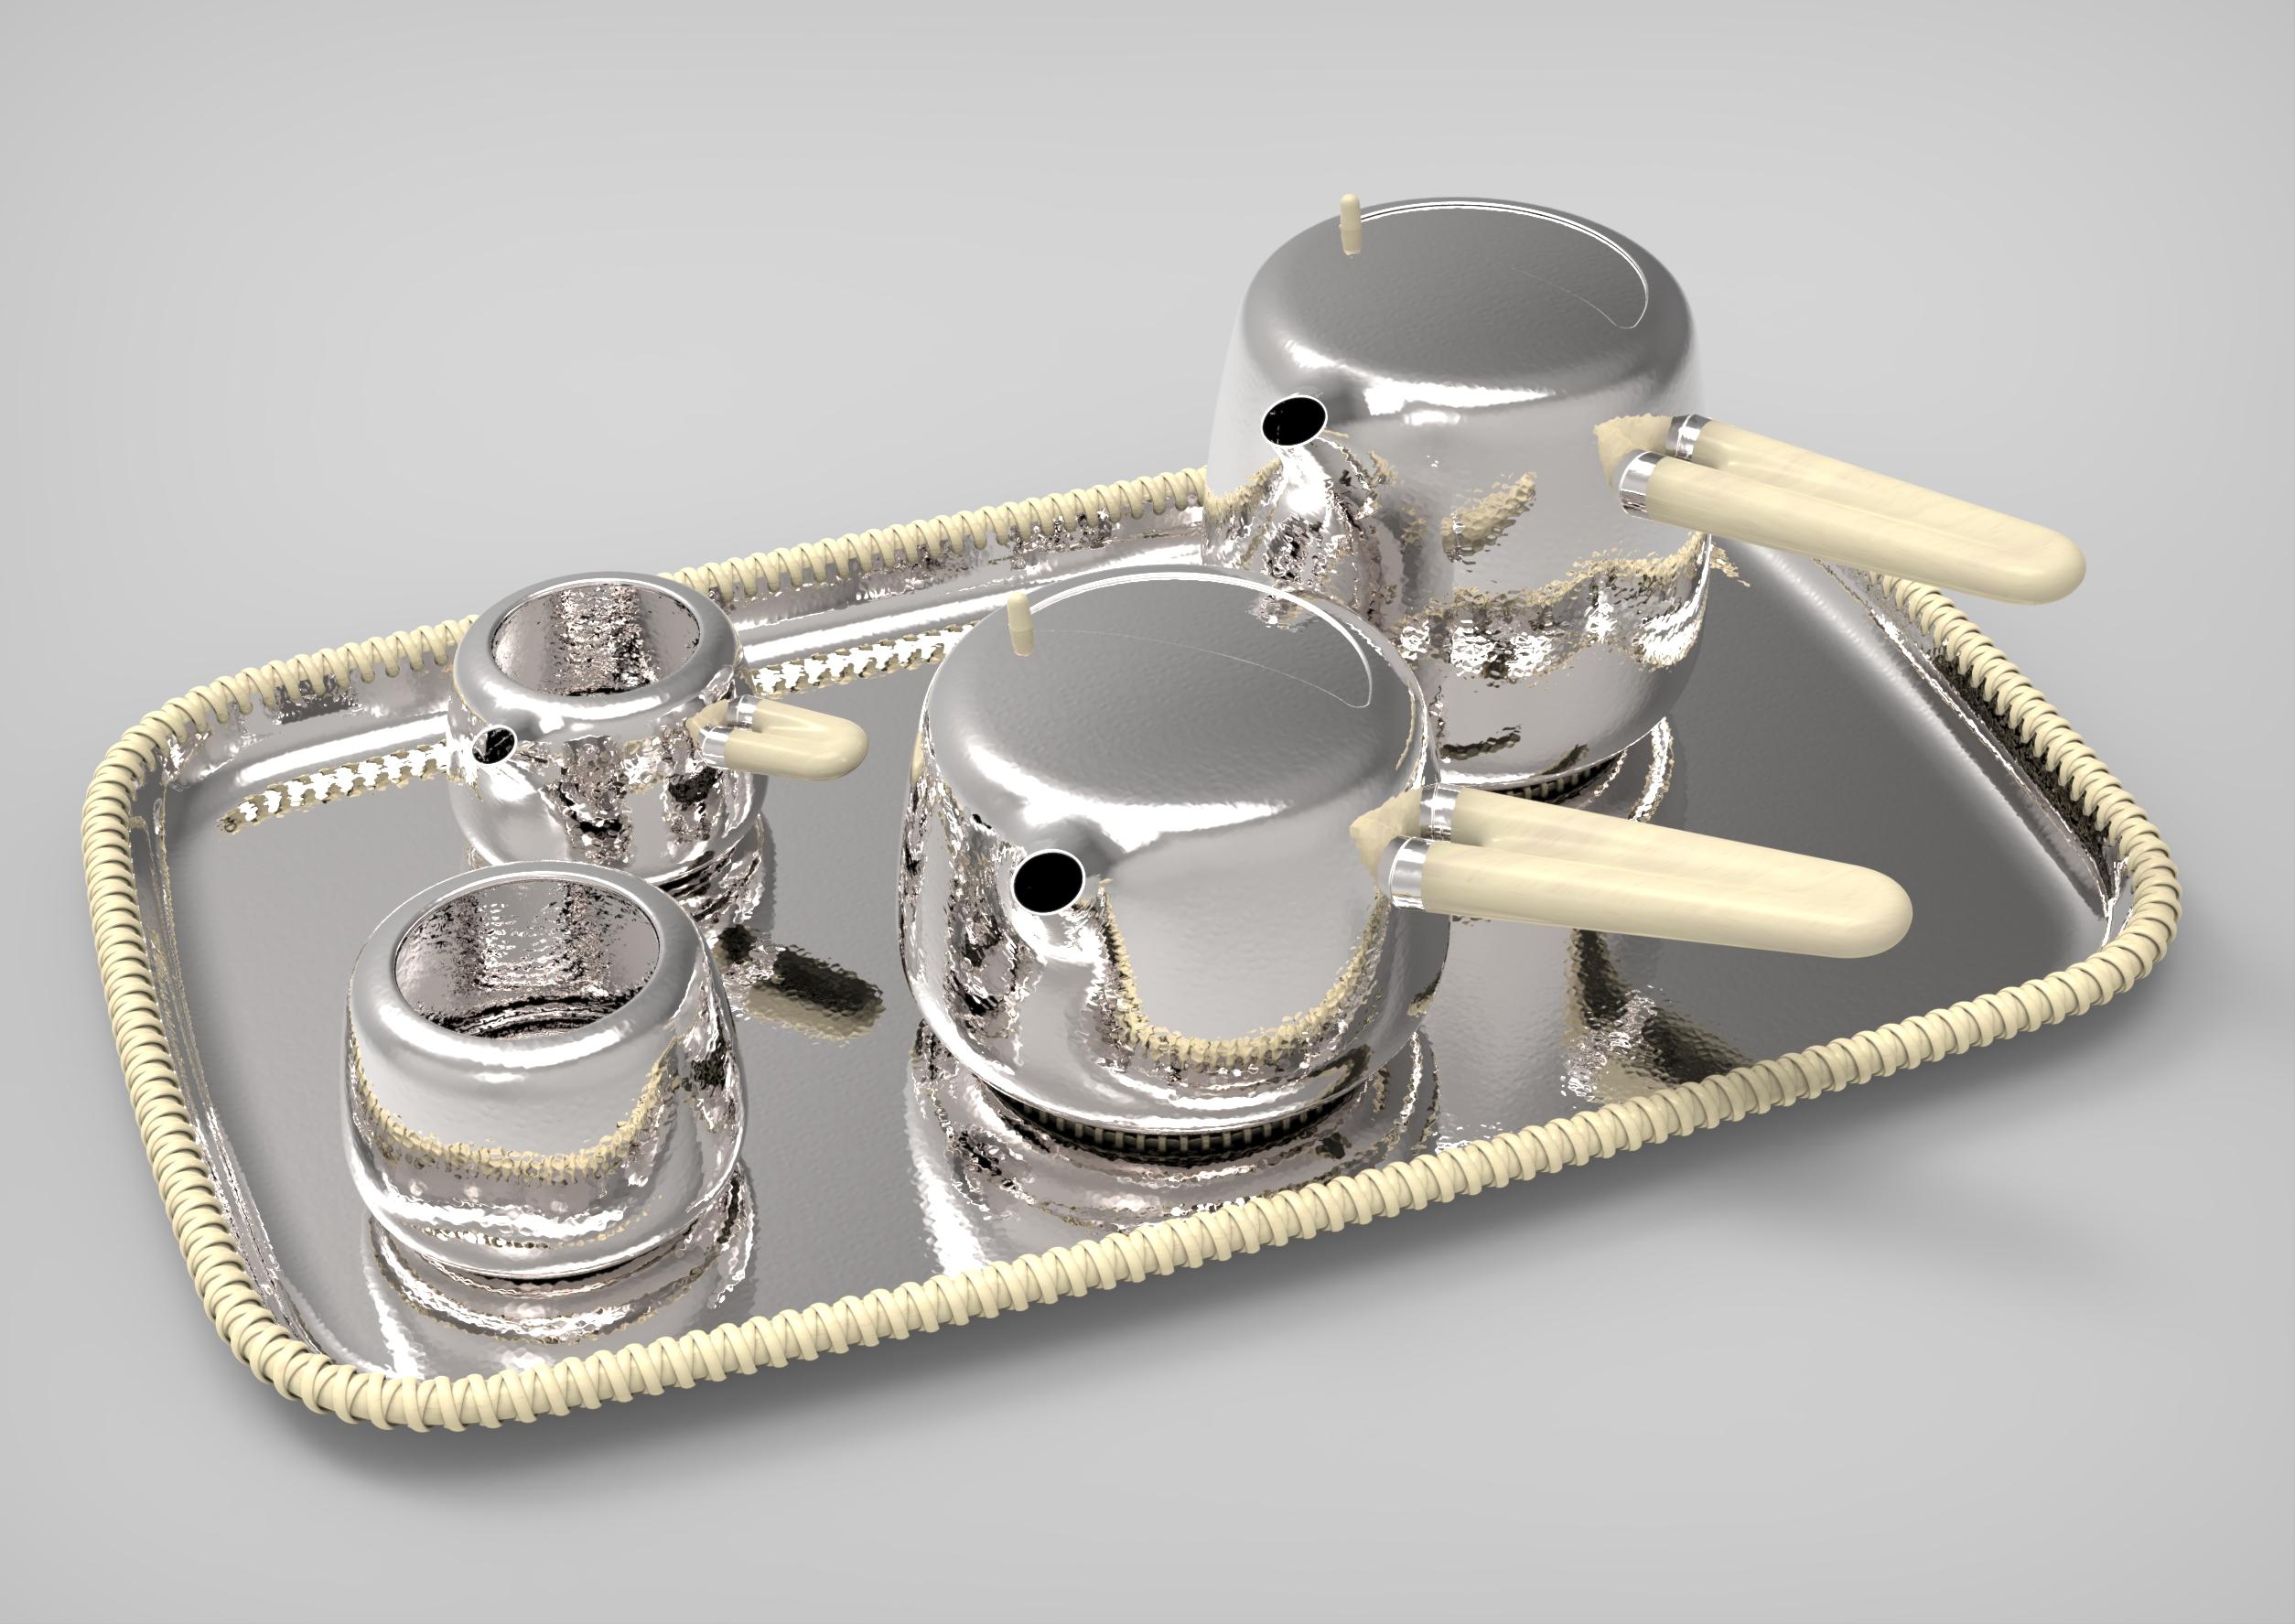 Limited Edition 7/10 Georg Jensen Sterling Silver Marc Newson Tea Set 1500 In New Condition For Sale In Hellerup, DK